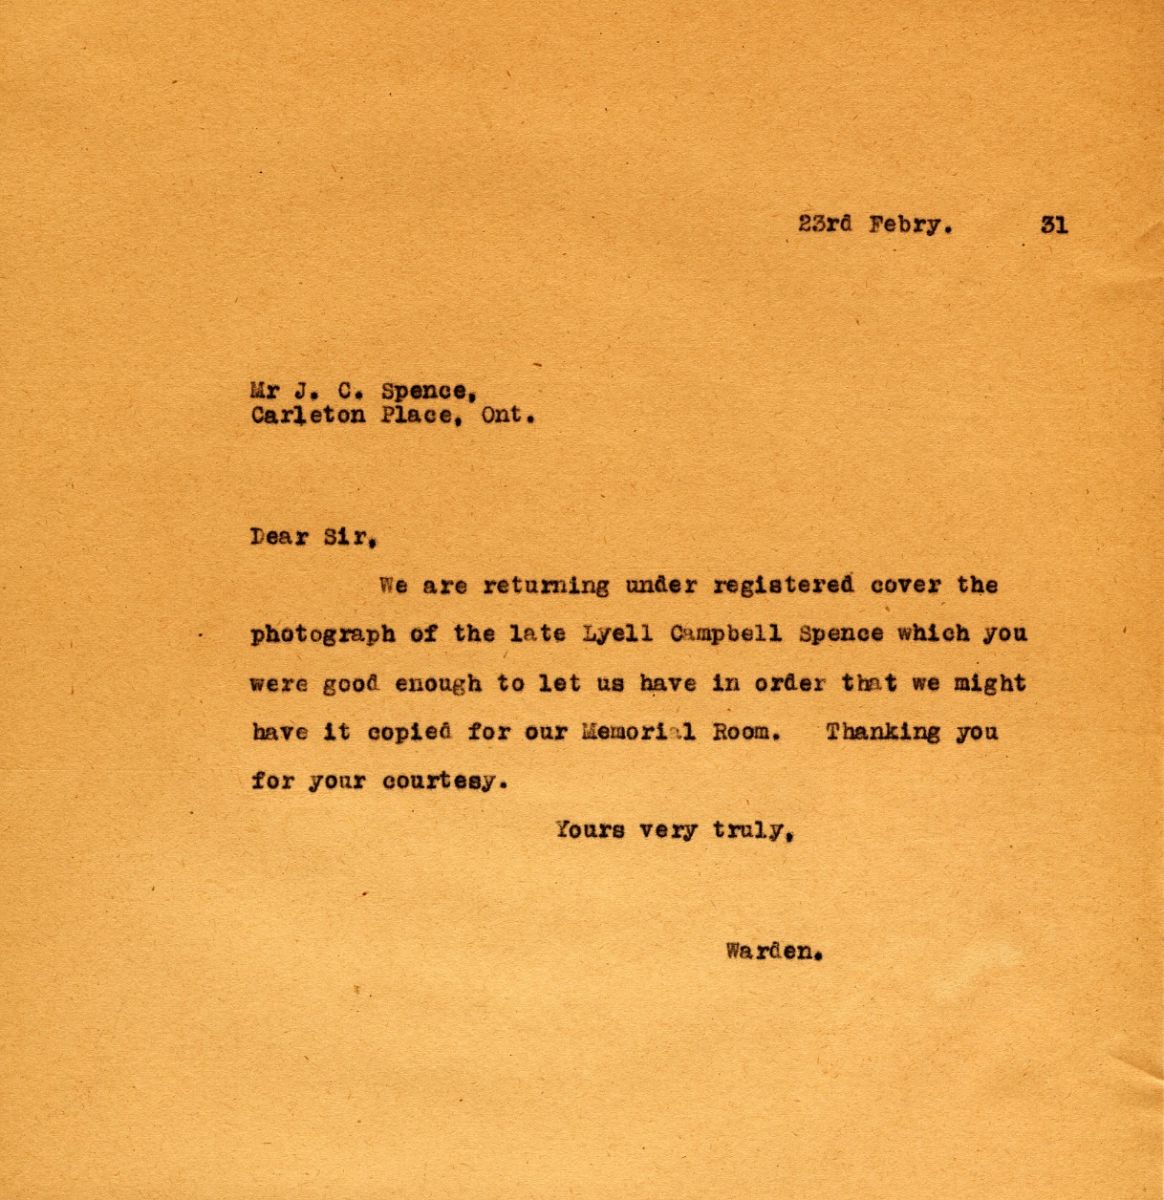 Letter from the Warden to Mr. J.C. Spence, 23rd February 1931